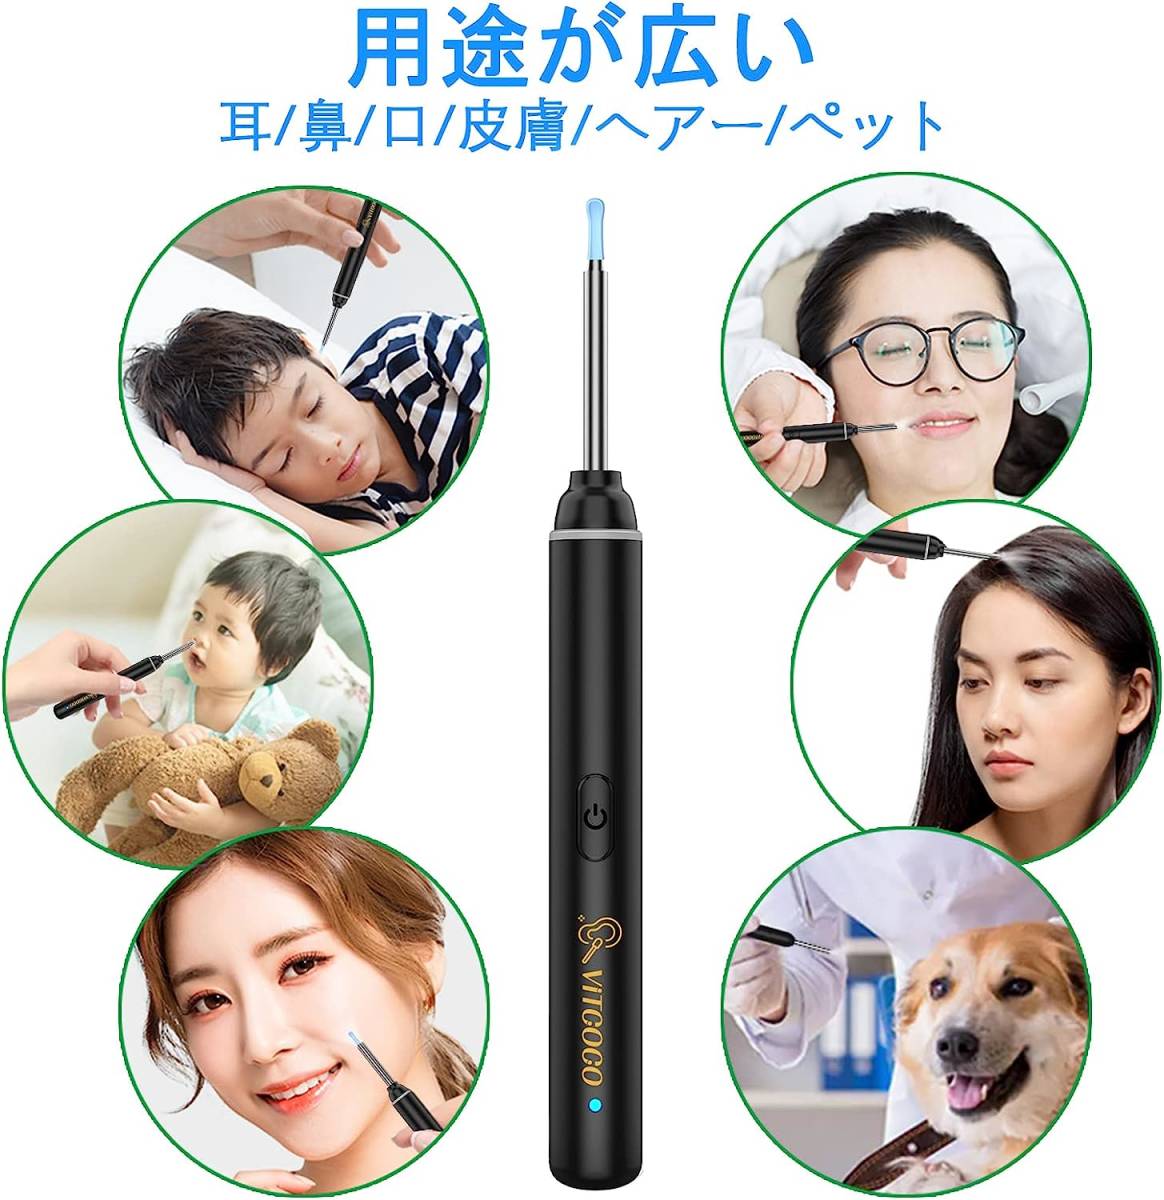  ear .. camera iPhone correspondence year scope superfine lens waterproof LED light attaching scope ear cleaning wireless WIFI connection Japanese owner manual attaching 